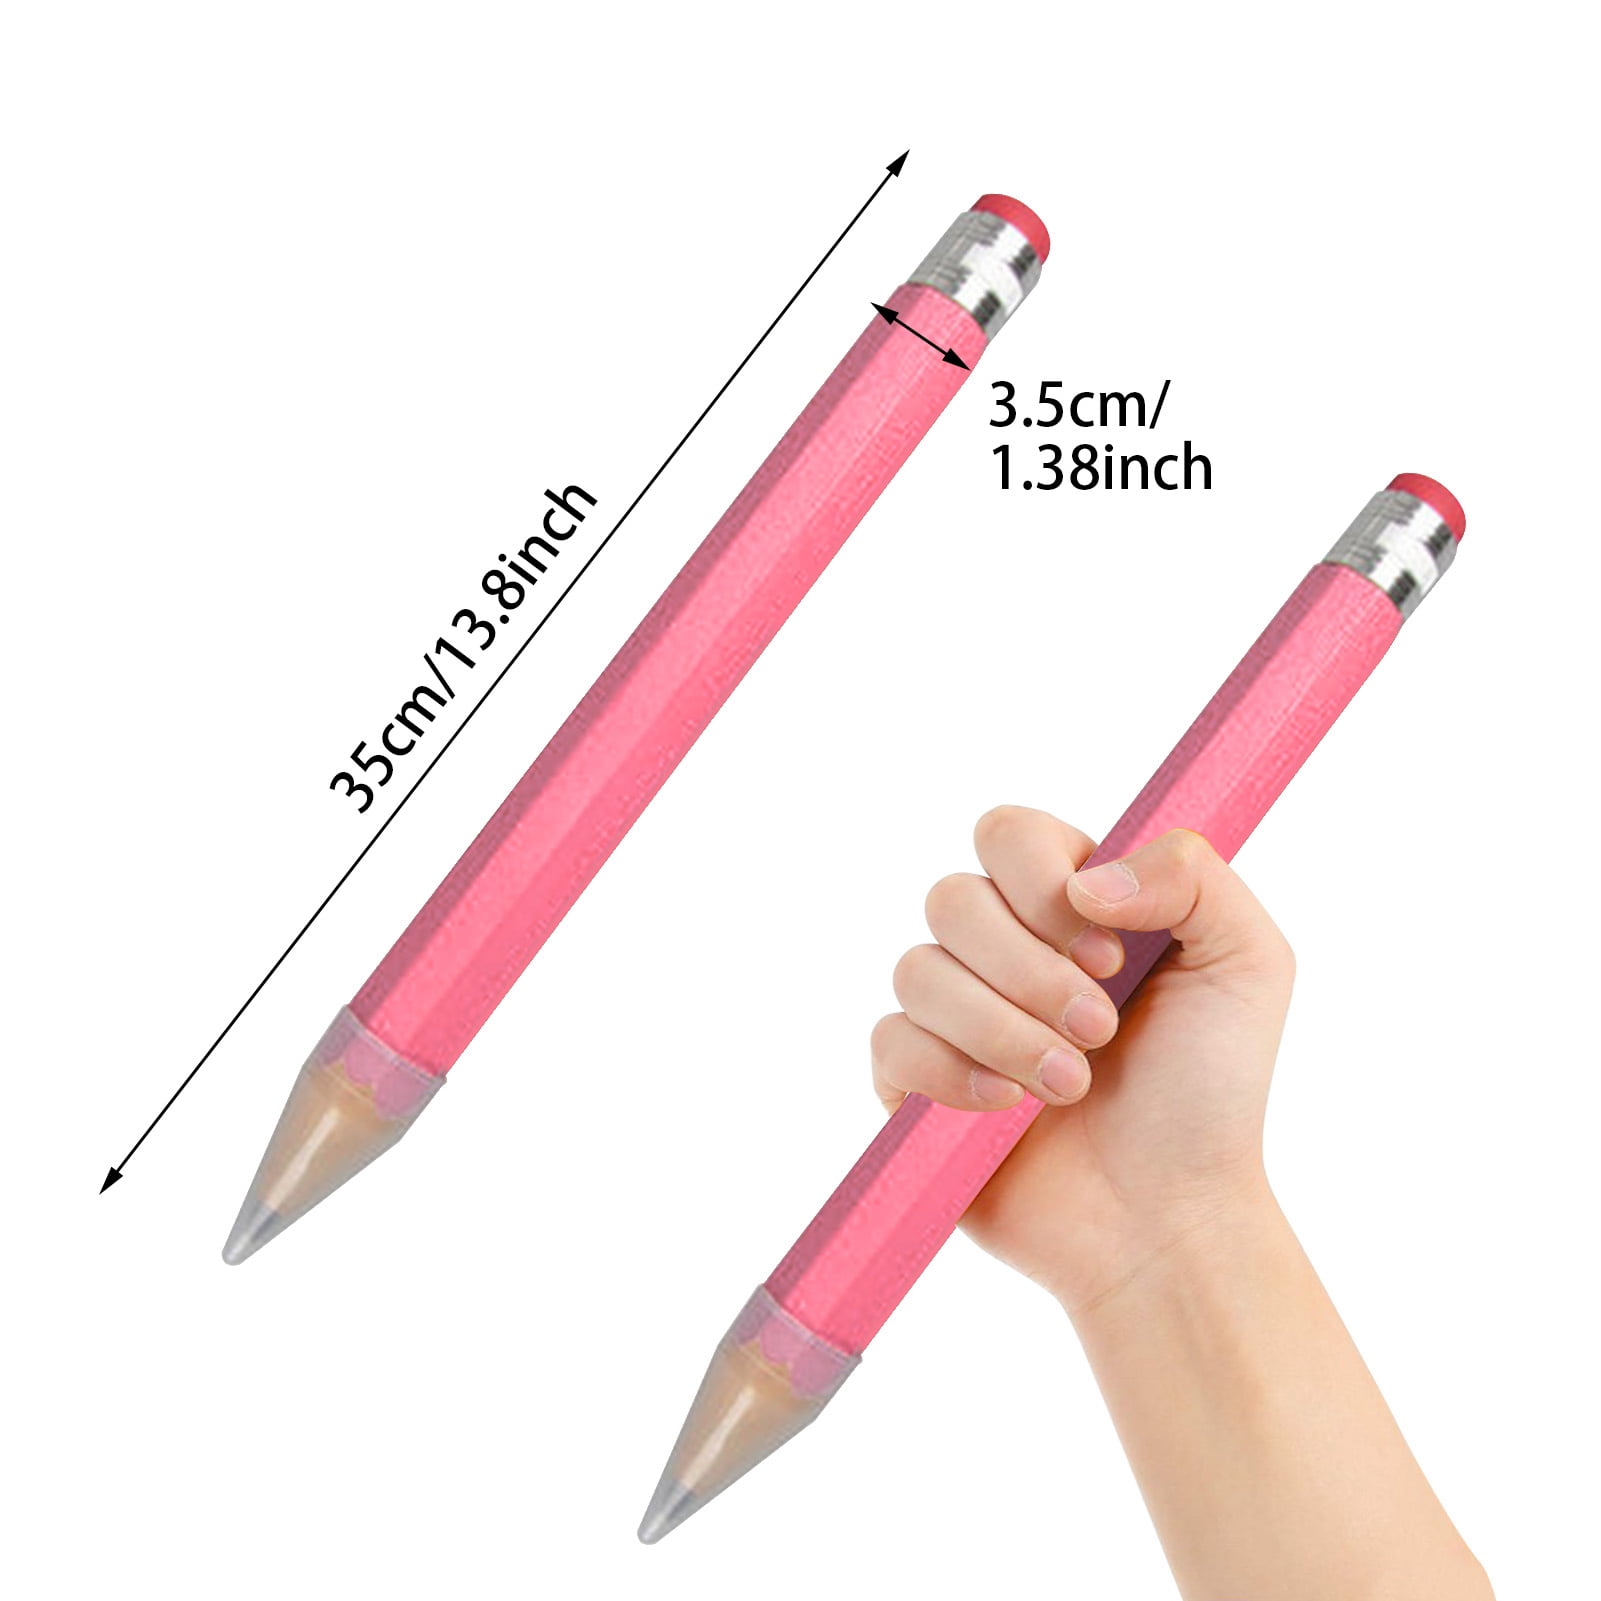 Wooden Jumbo Pencils for Prop/Gifts/Decor - 14 inch Funny Big Novelty Pencil with Cap(Pink) for Schools and Homes by Bushibu, Size: 1XL